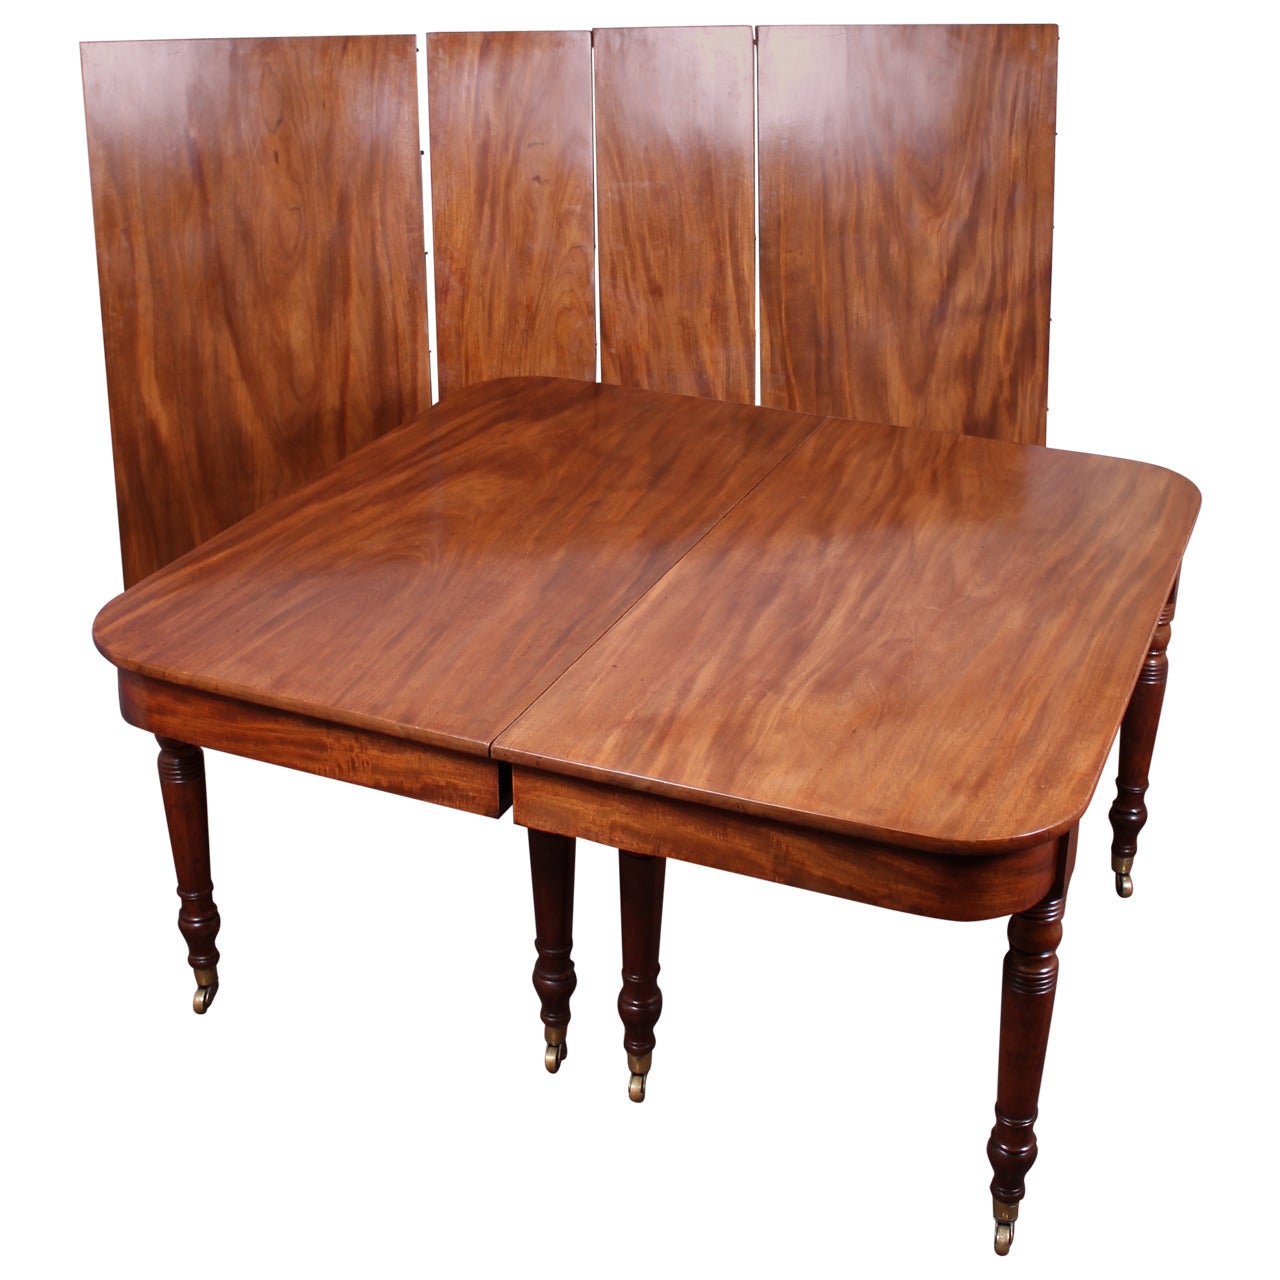 George IV Period Golden Mahogany Extending Dining Table